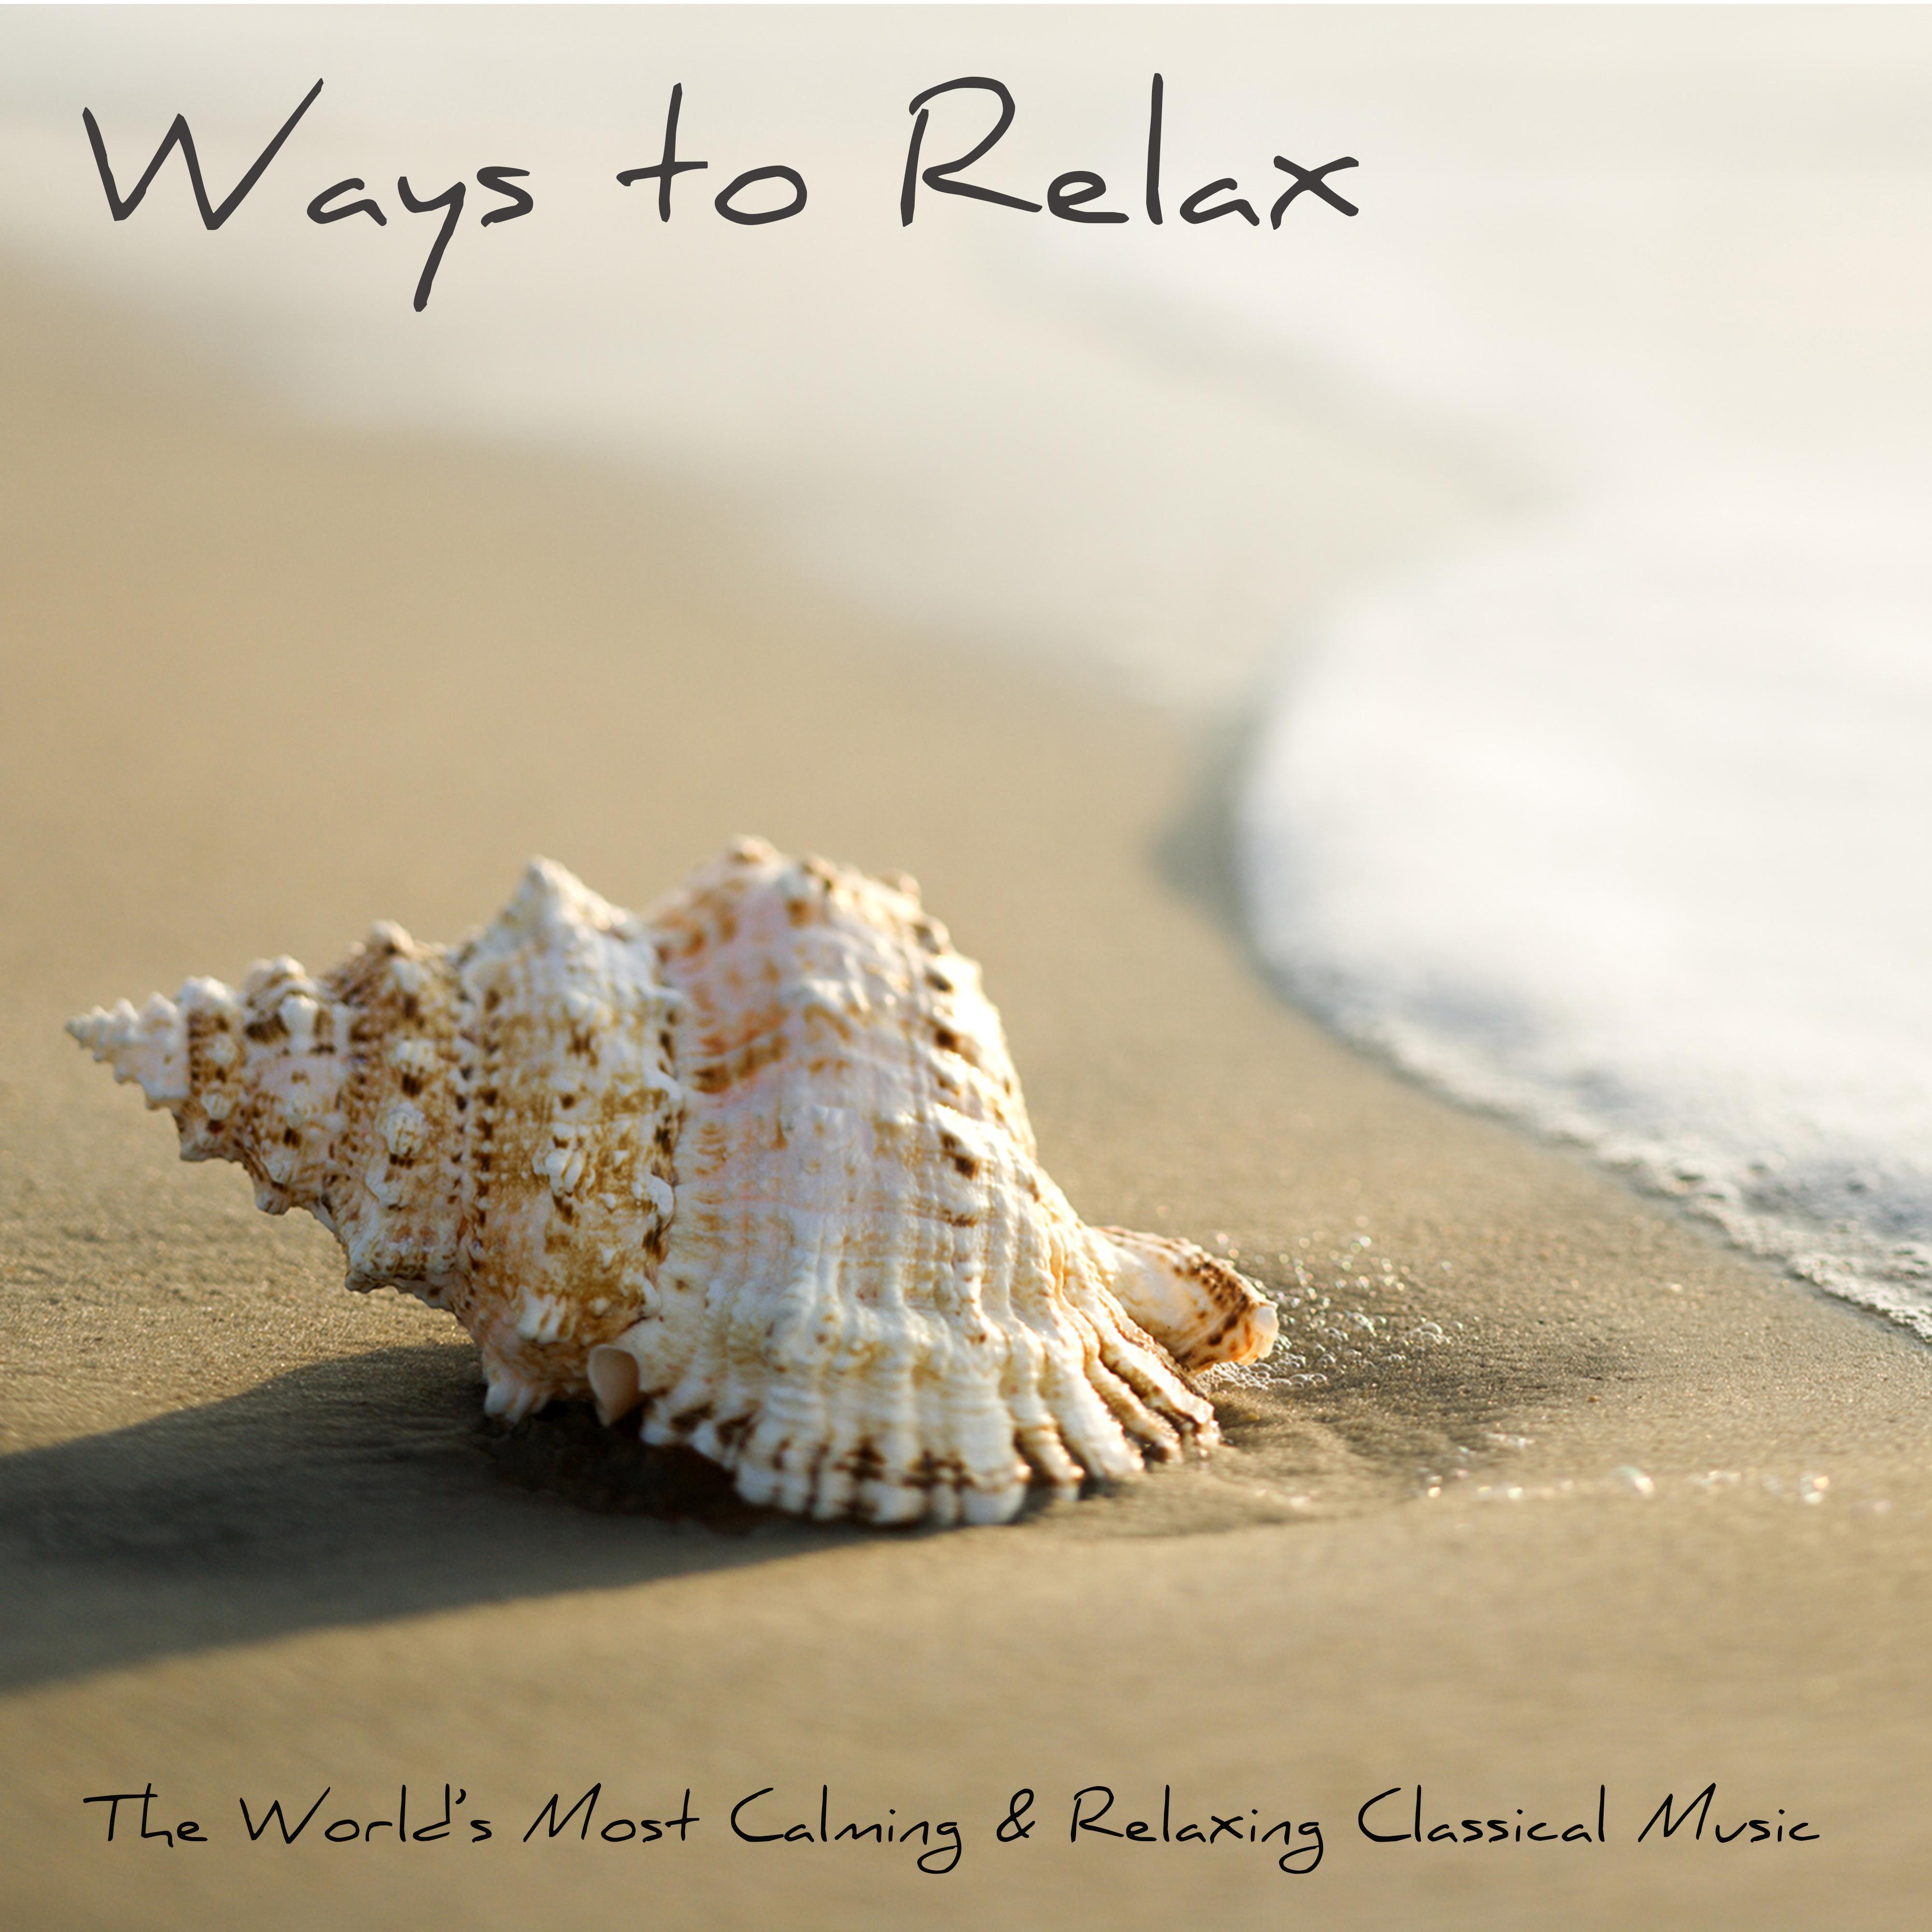 Ways to Relax